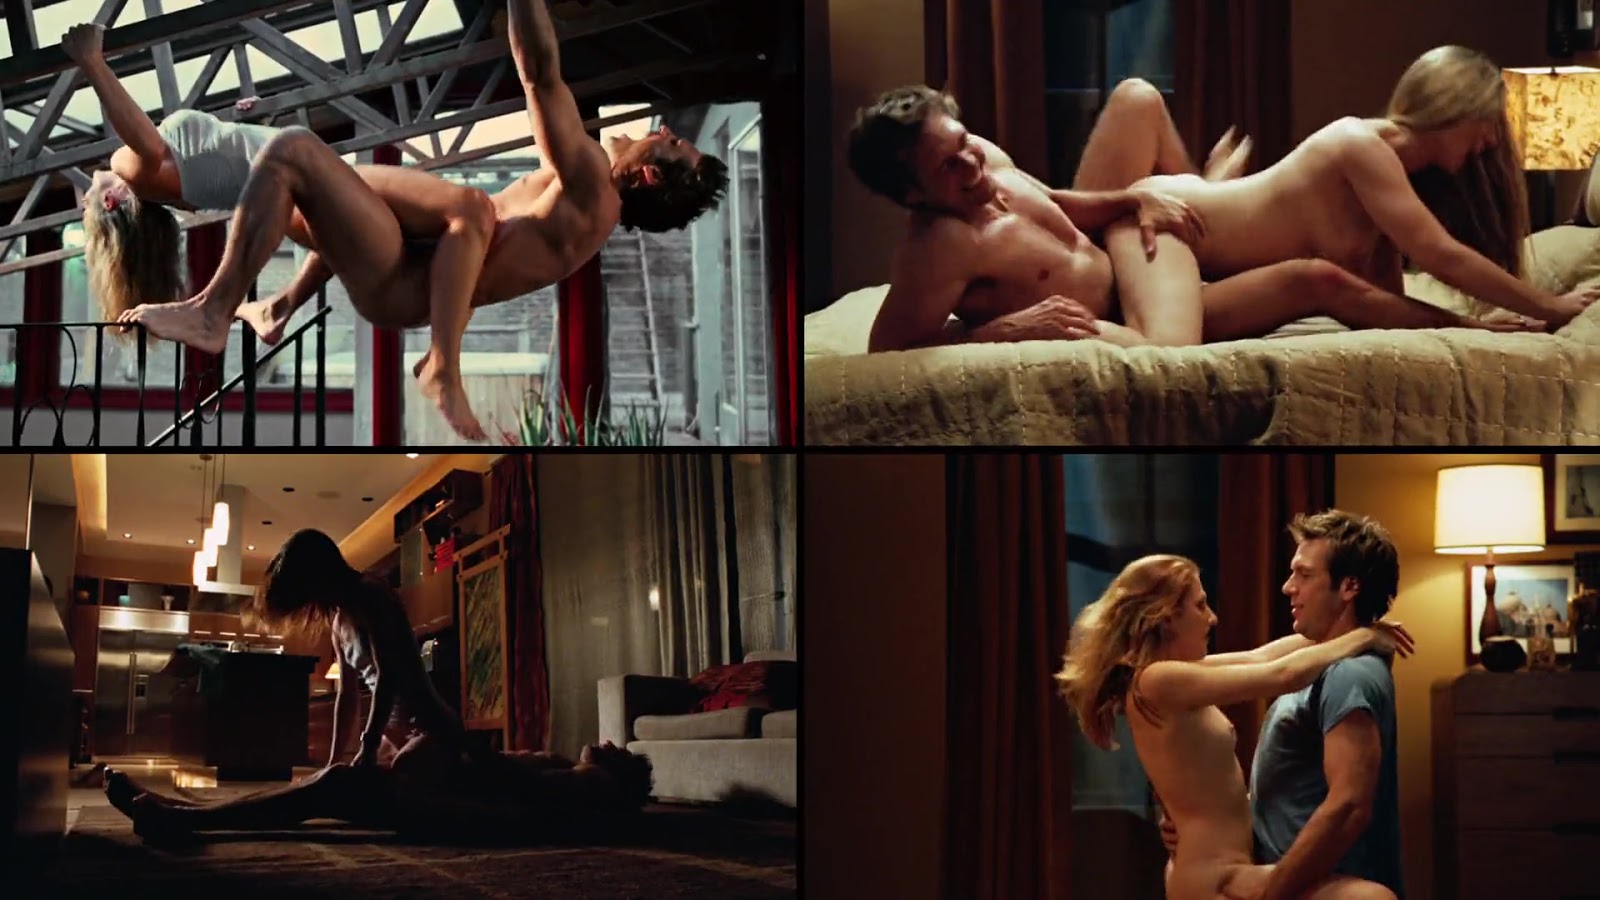 Dane Cook nude in Good Luck Chuck. ausCAPS: Dane Cook nude in Good Luck Chu...